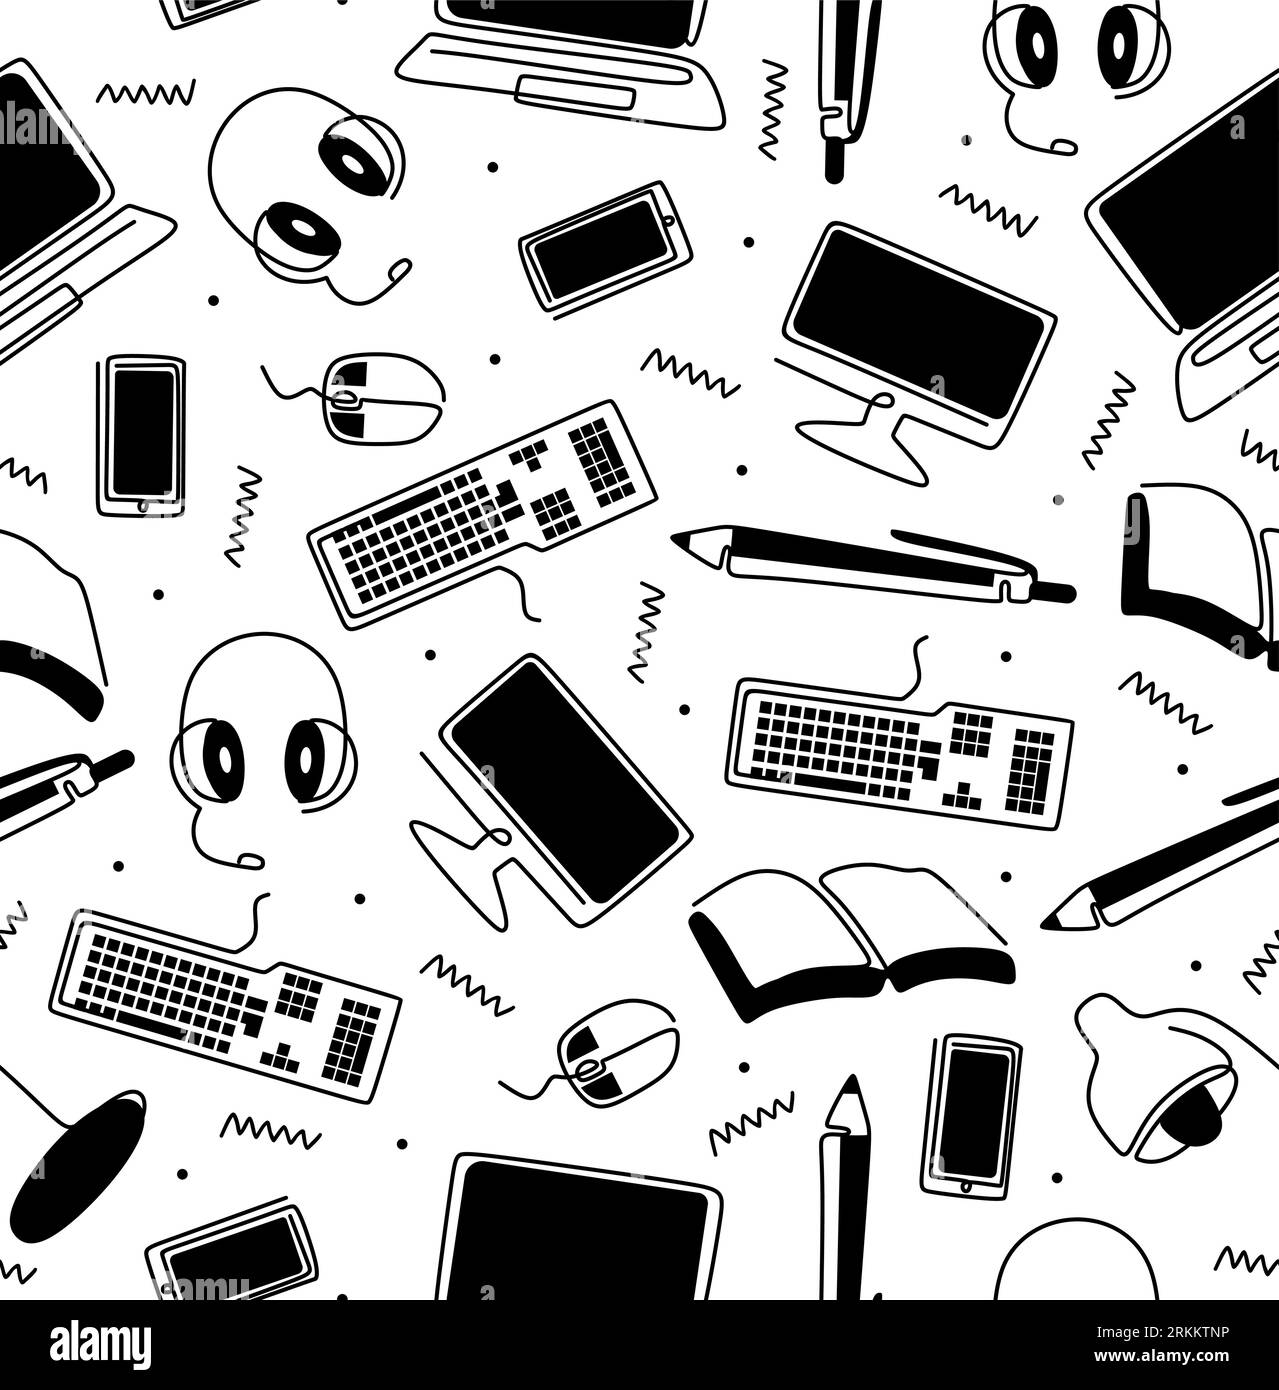 Online education hand drawn seamless pattern. Laptop, notebook, pen, pencil, headset, mouse, computer, keyboard, book isolated on white background. Ve Stock Vector